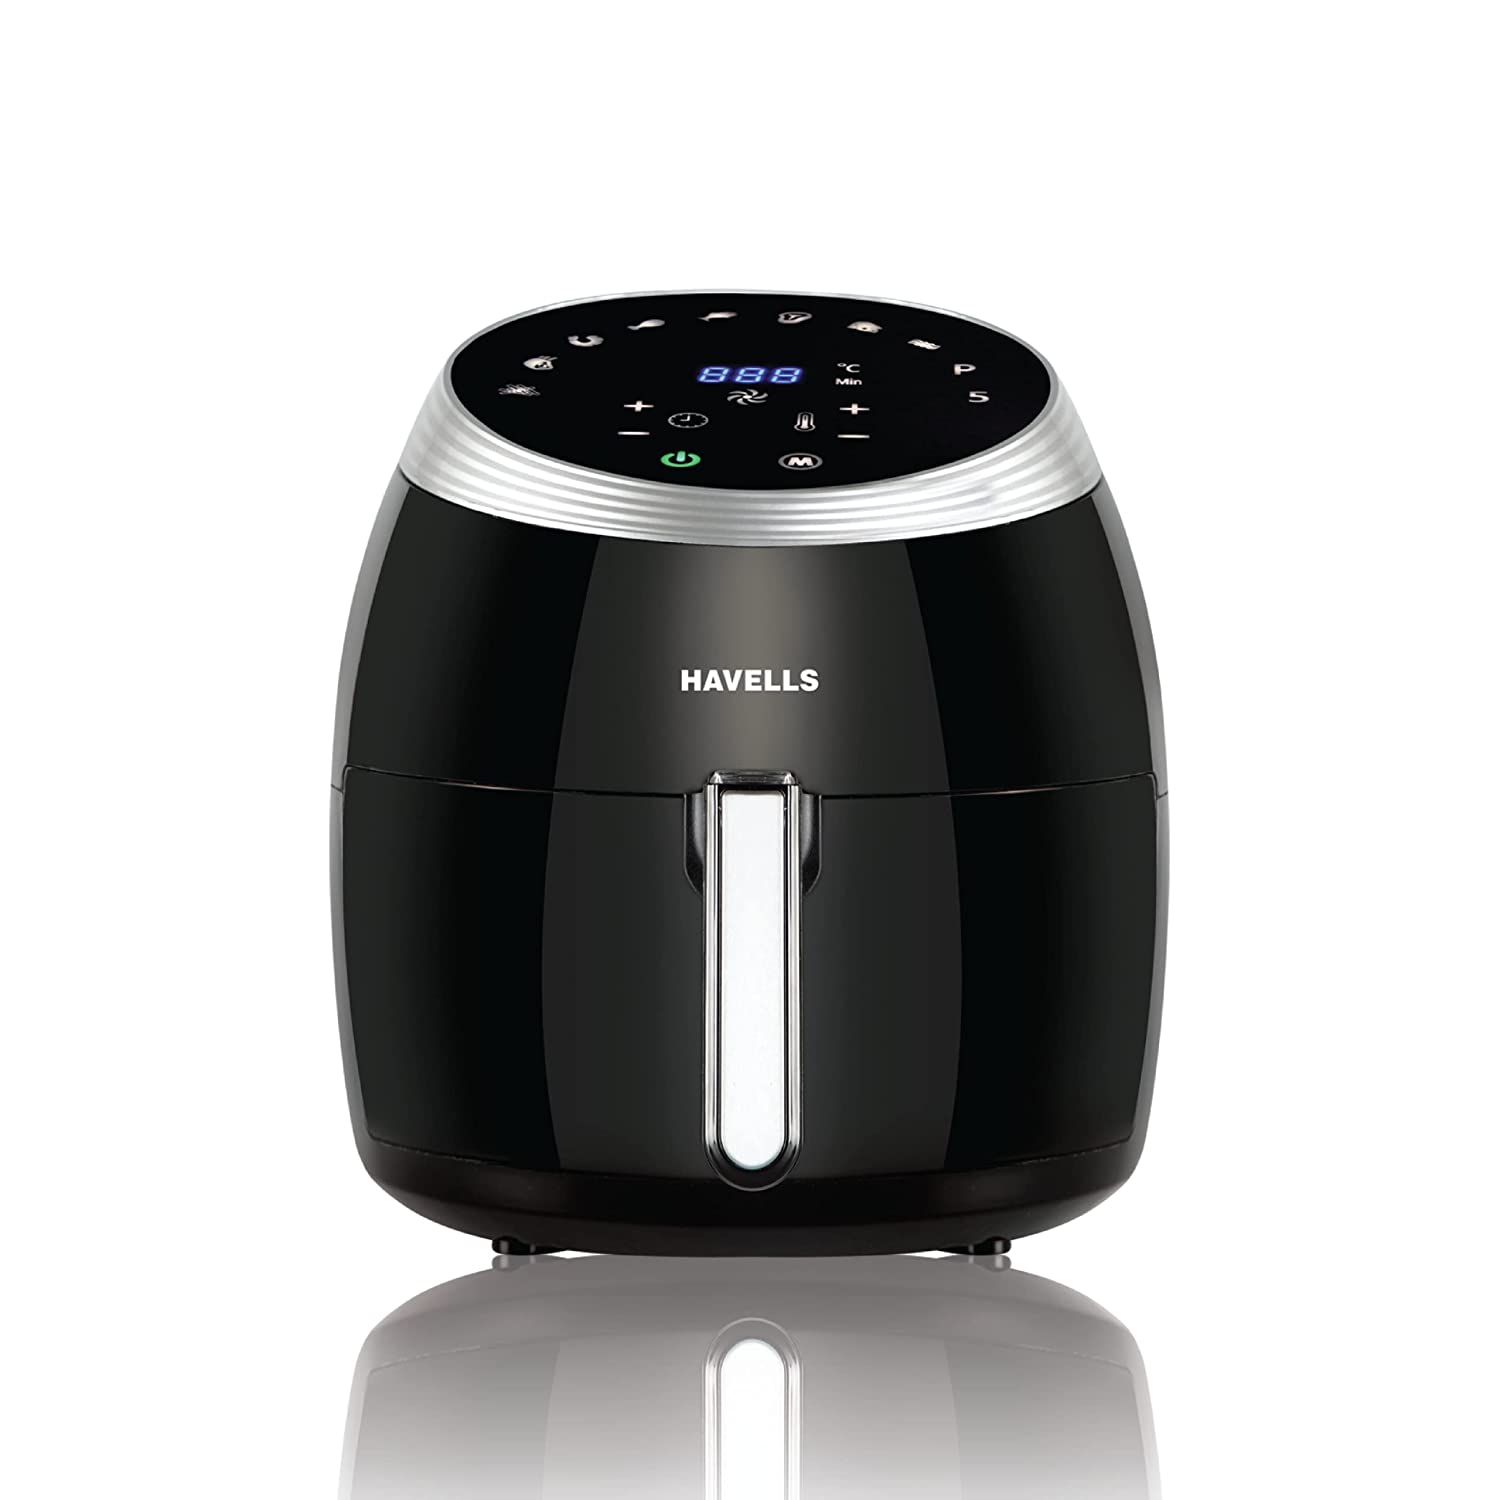 Havells Air Fryer price & Review